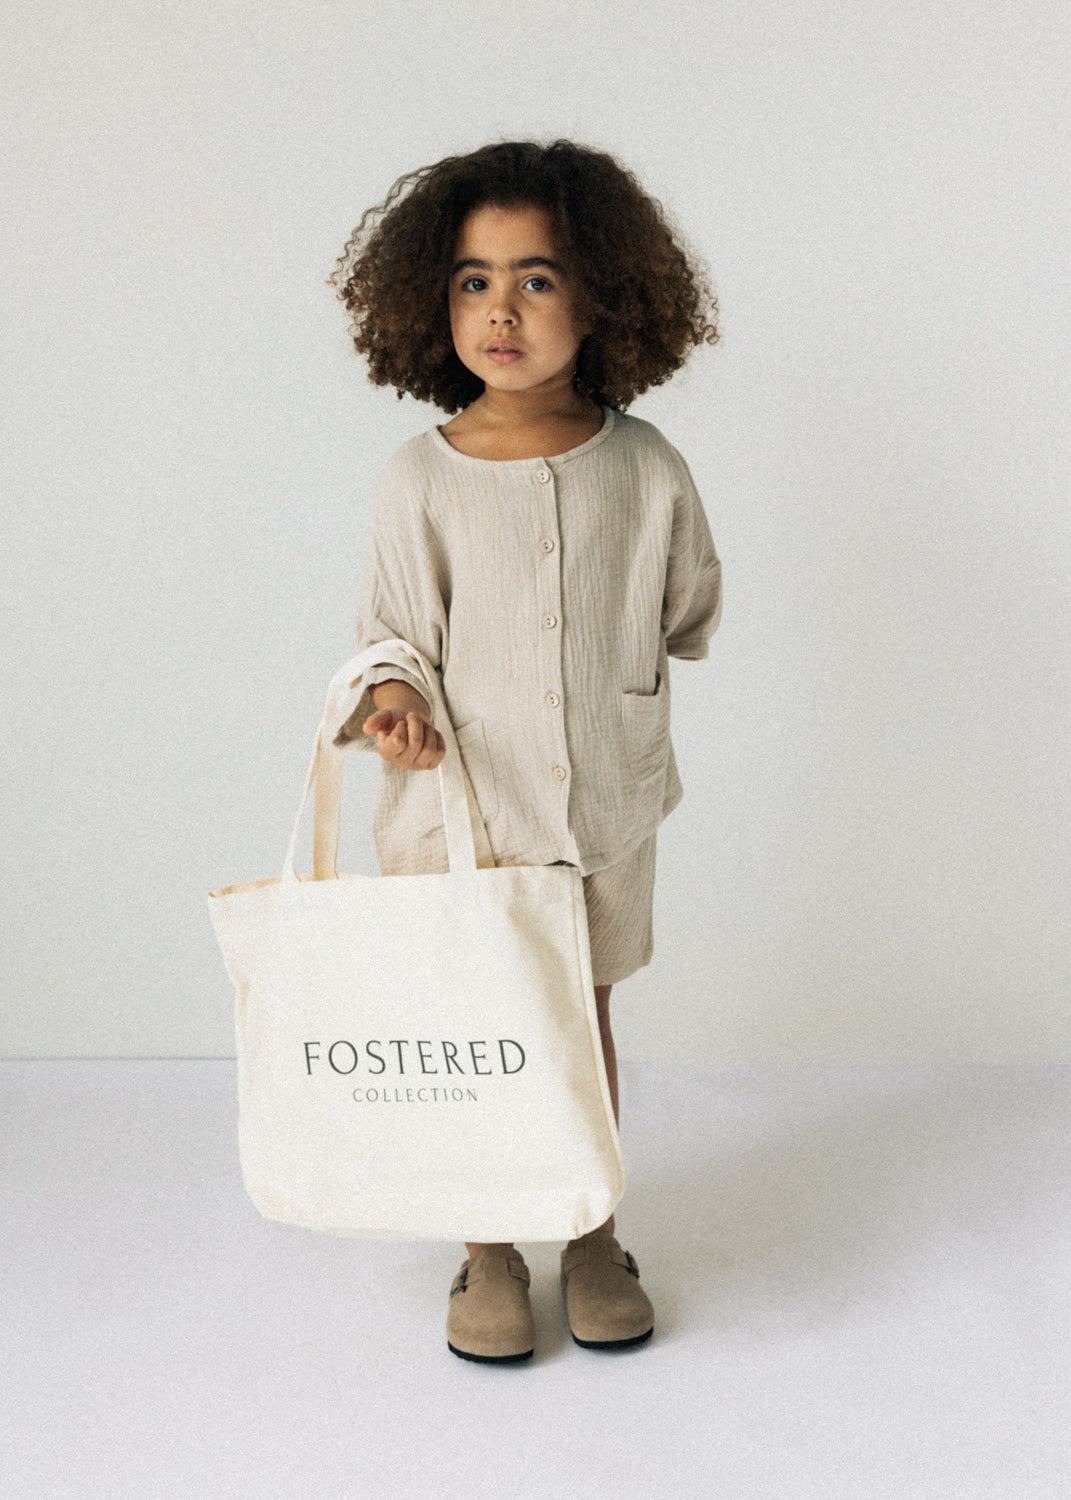 Fostered Collection Fostered Canvas Bag